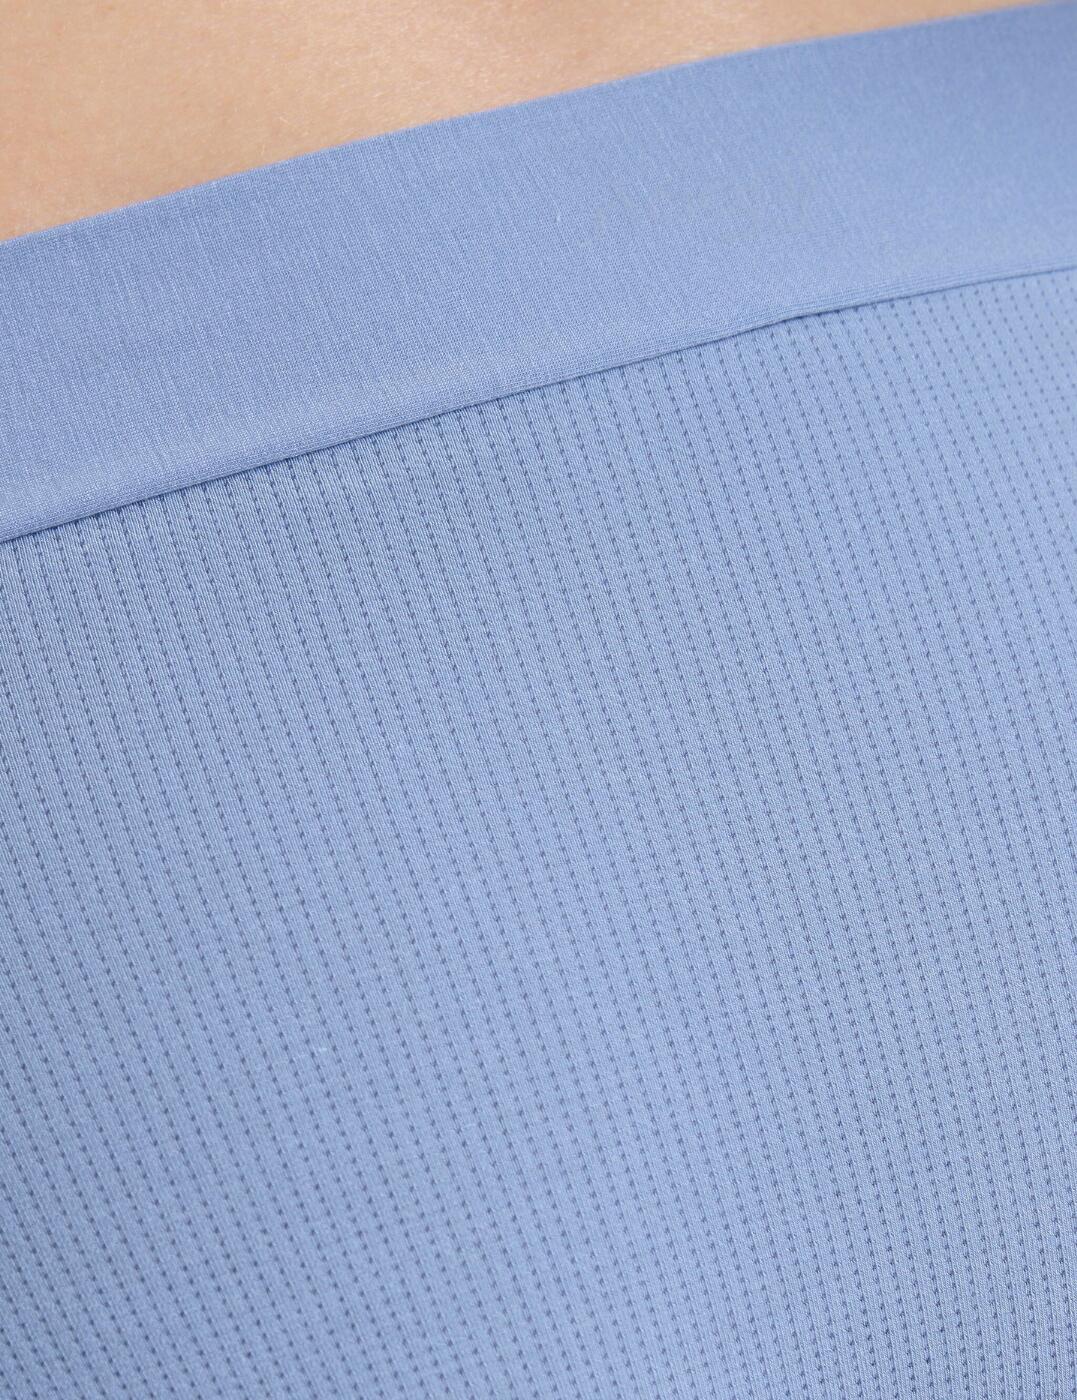 Silky feel, supportive fit. This is the SuperSoft Micromodal